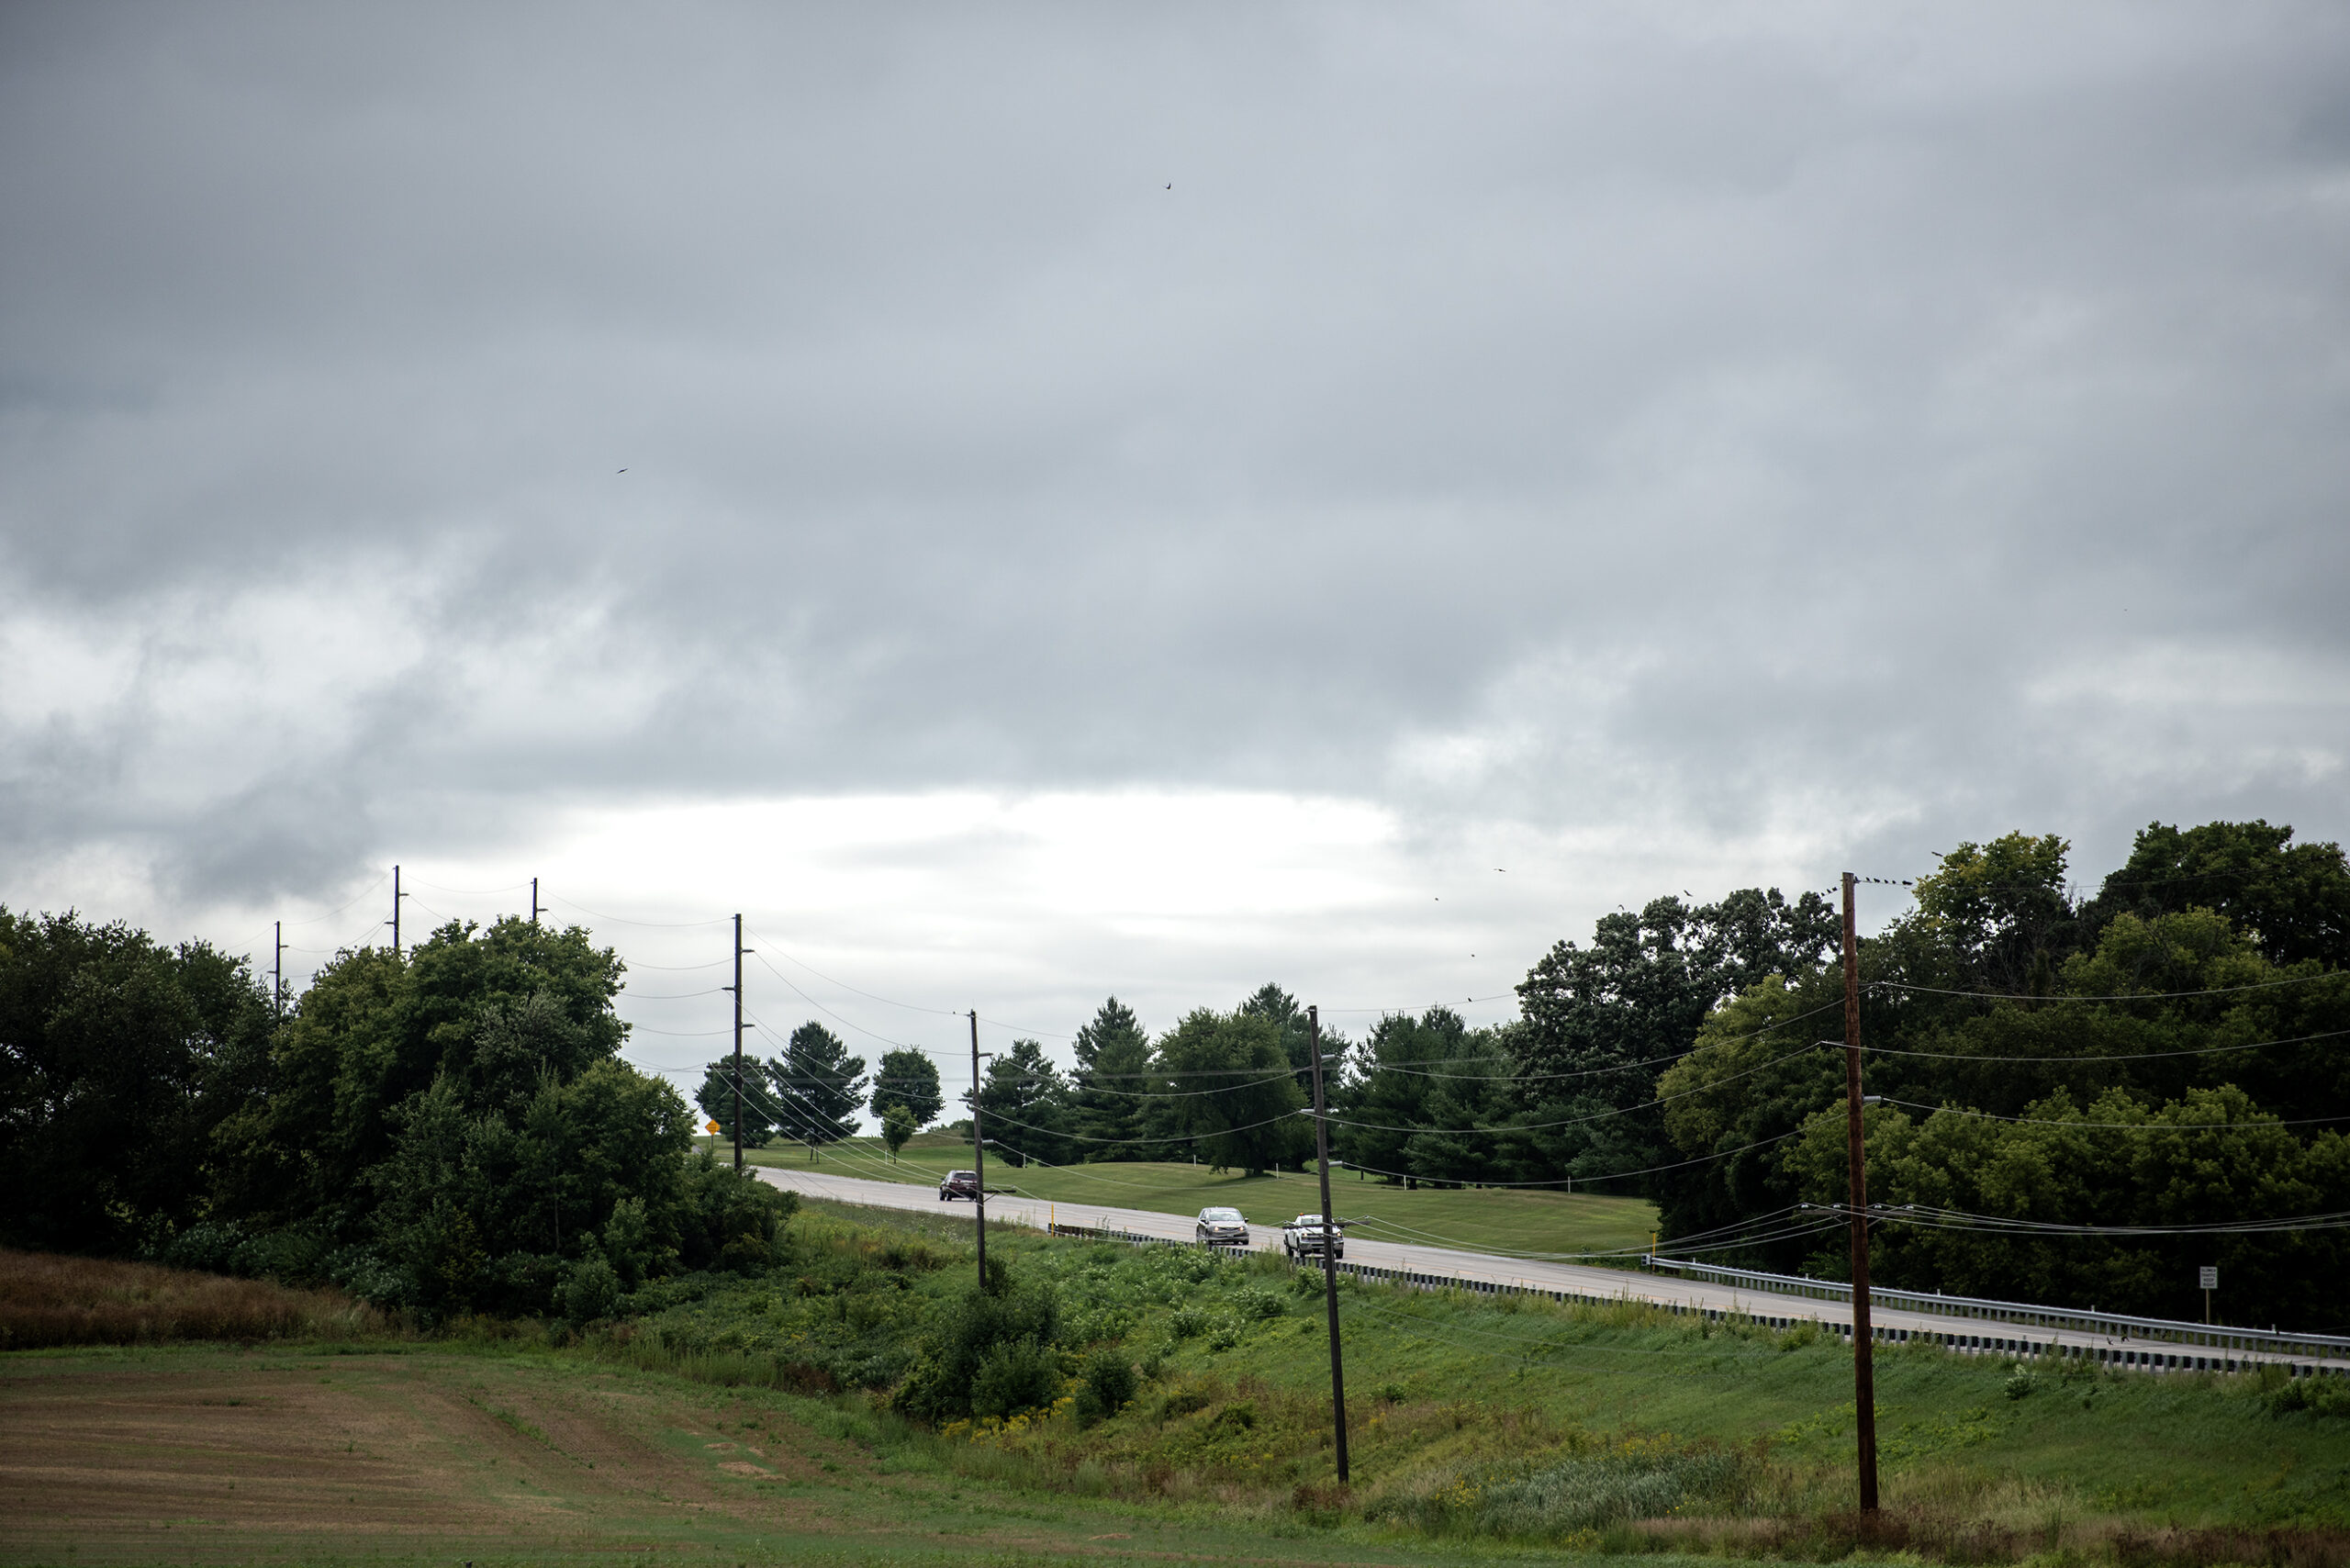 Dark clouds fill the sky as cars pass by on a county highway.